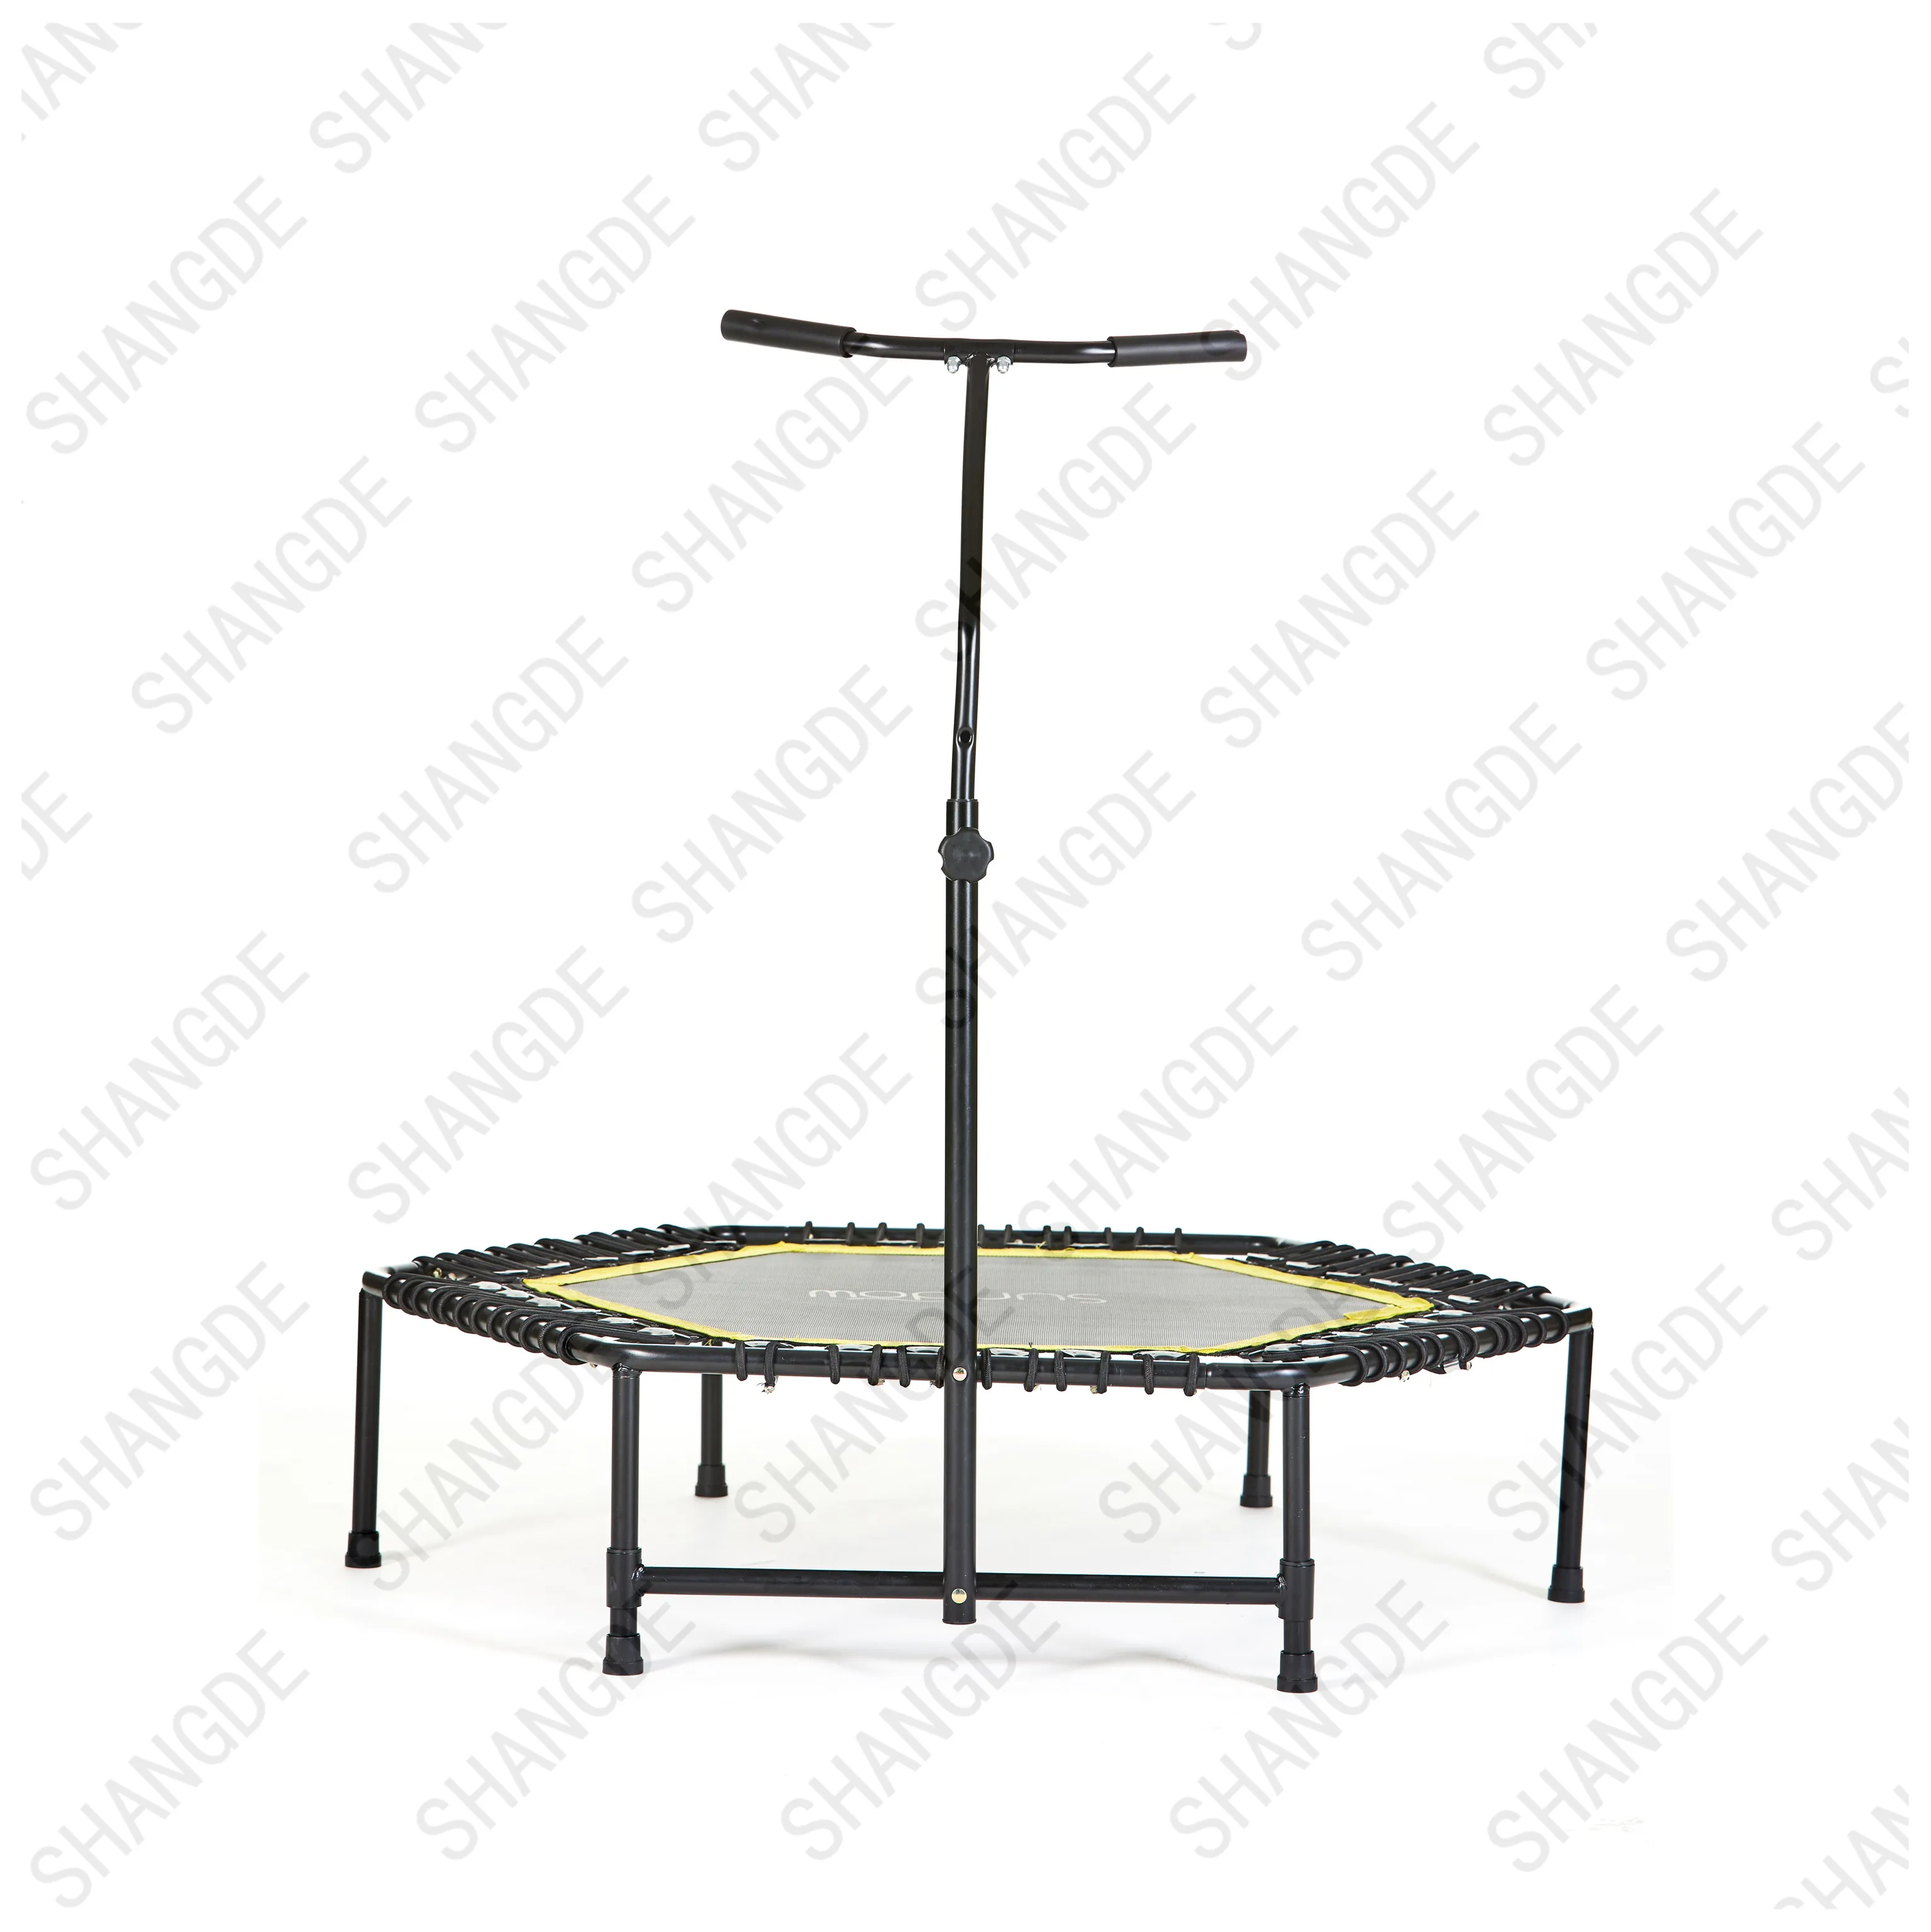 

Sundow Attractive Price New Type Outdoor Kids Fitness Mini Trampolines With Handle, Customized color